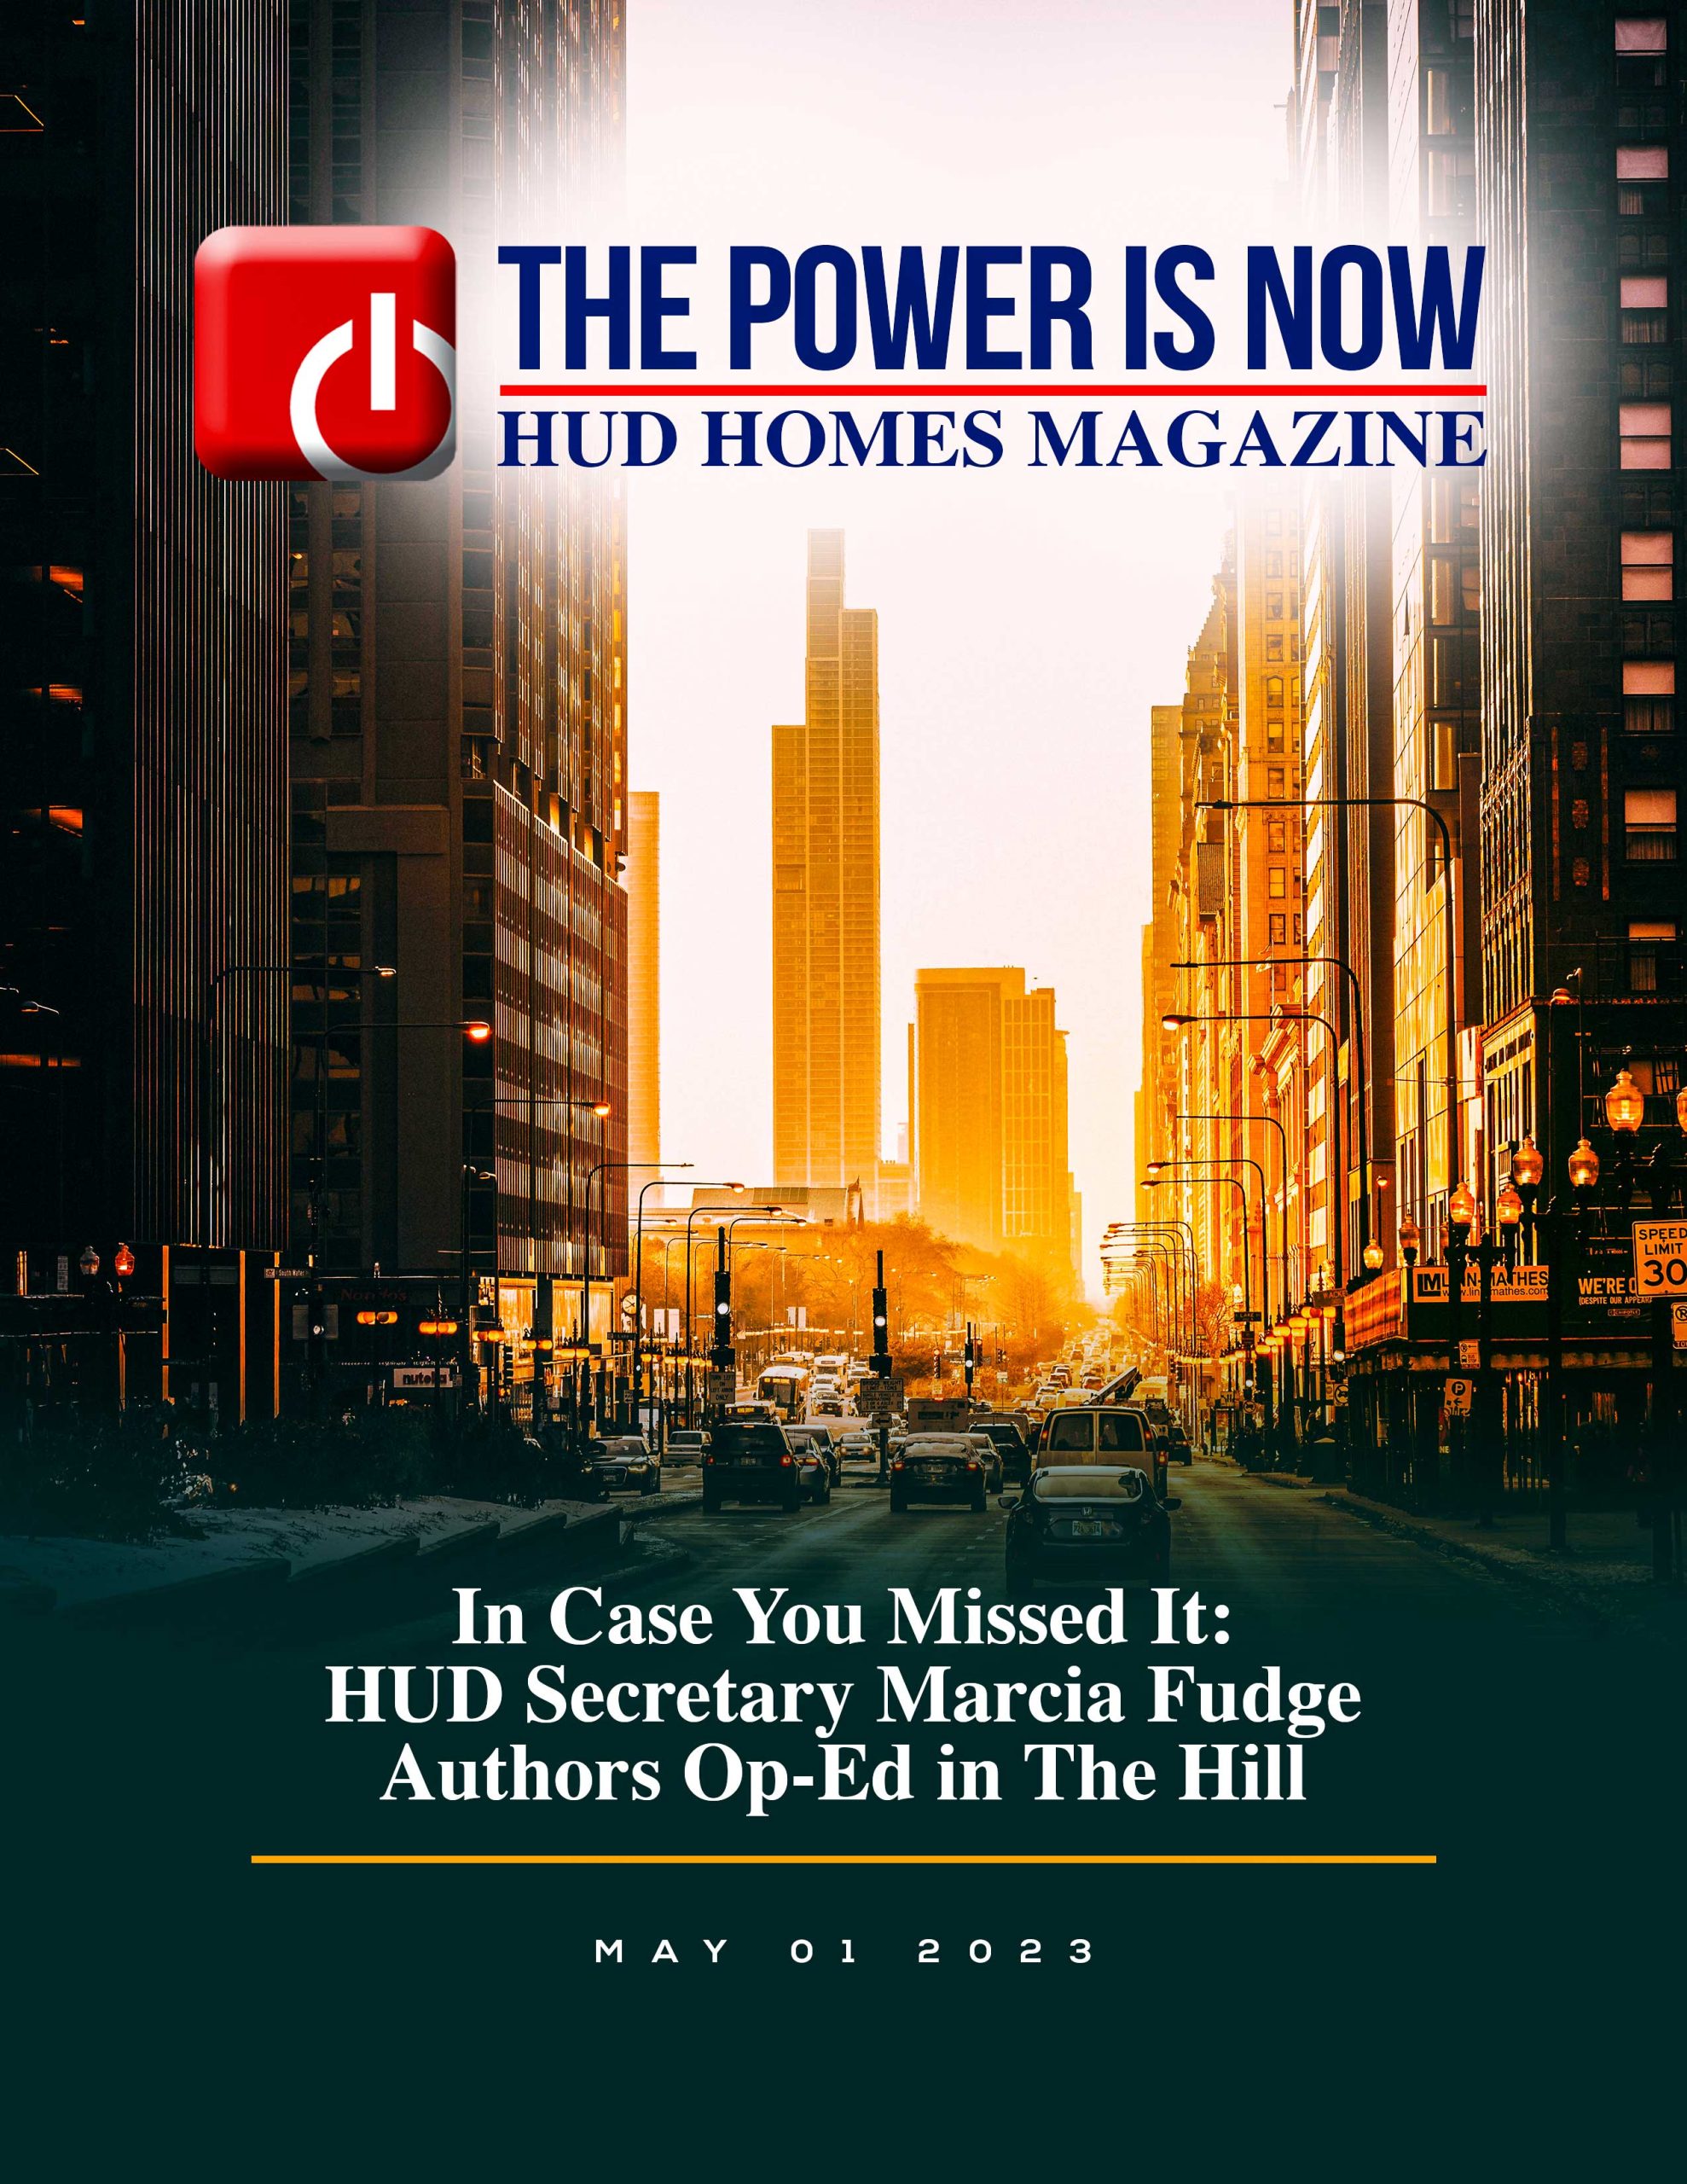 The Power Is Now HUD Magazine | HUD Secretary Marcia Fudge Authors Op-Ed in The Hill